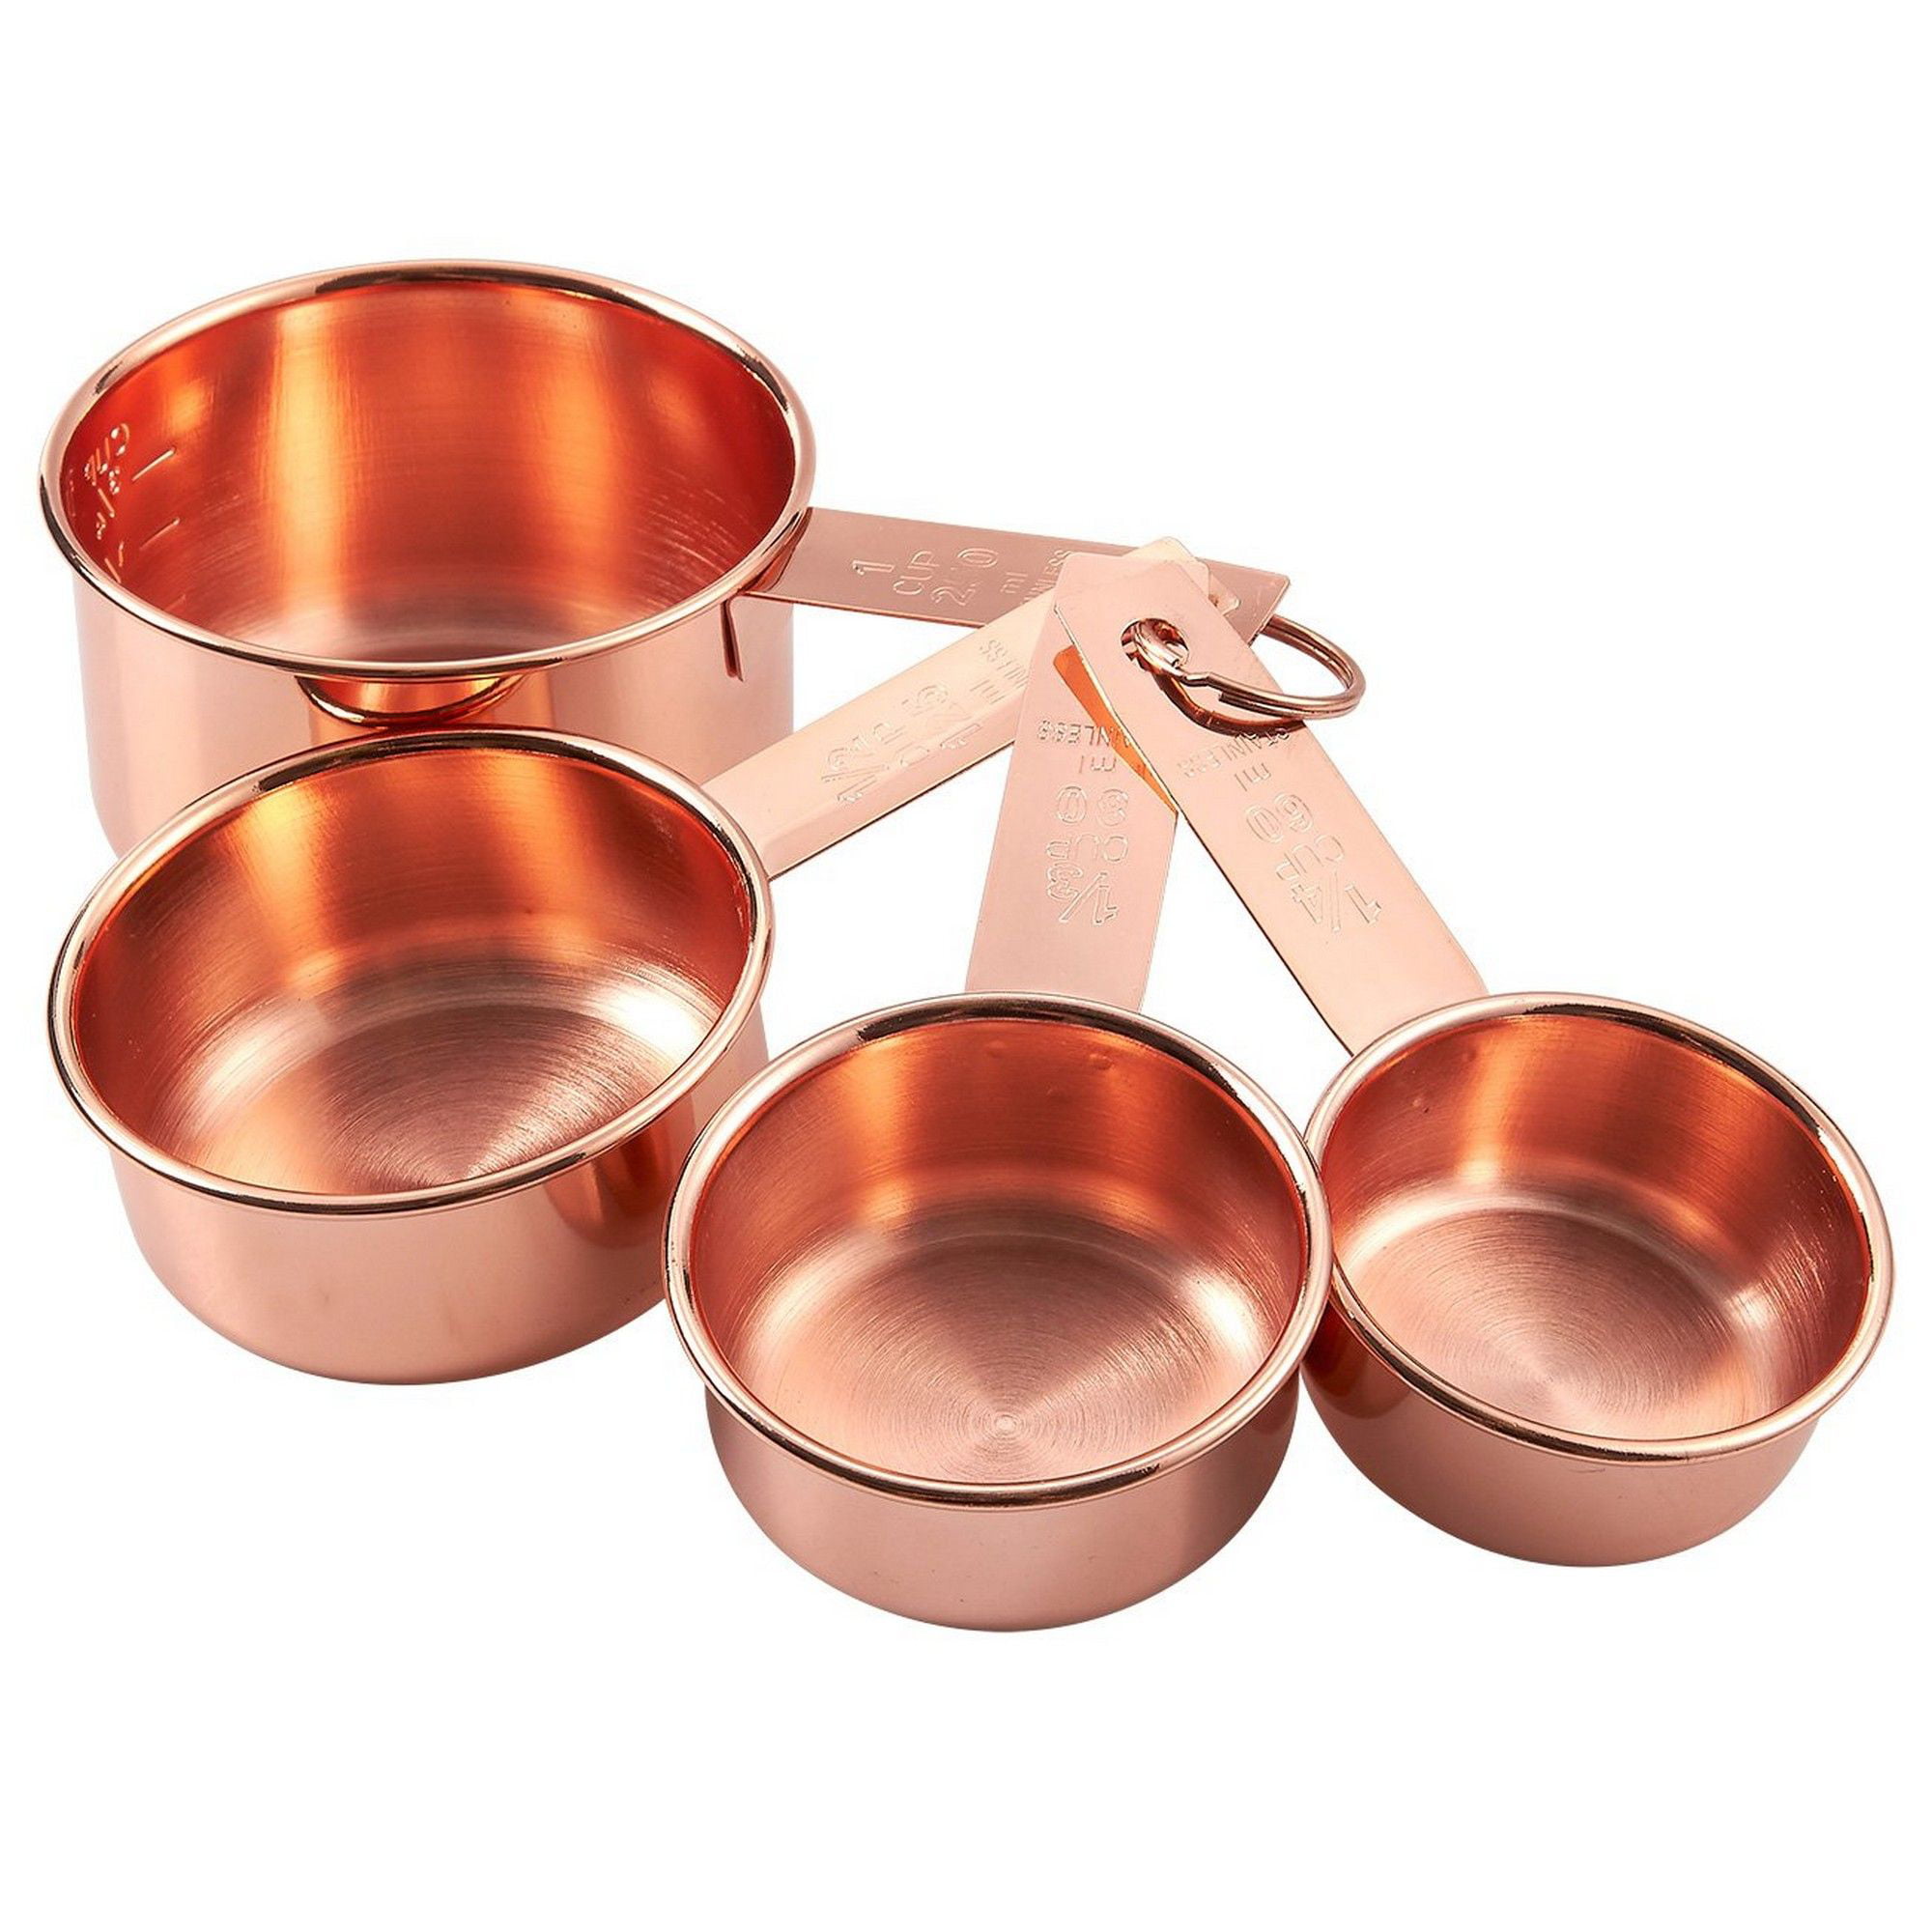 4-Piece Set of Stainless Steel Measuring Cup Set - Copper-Plated Metal